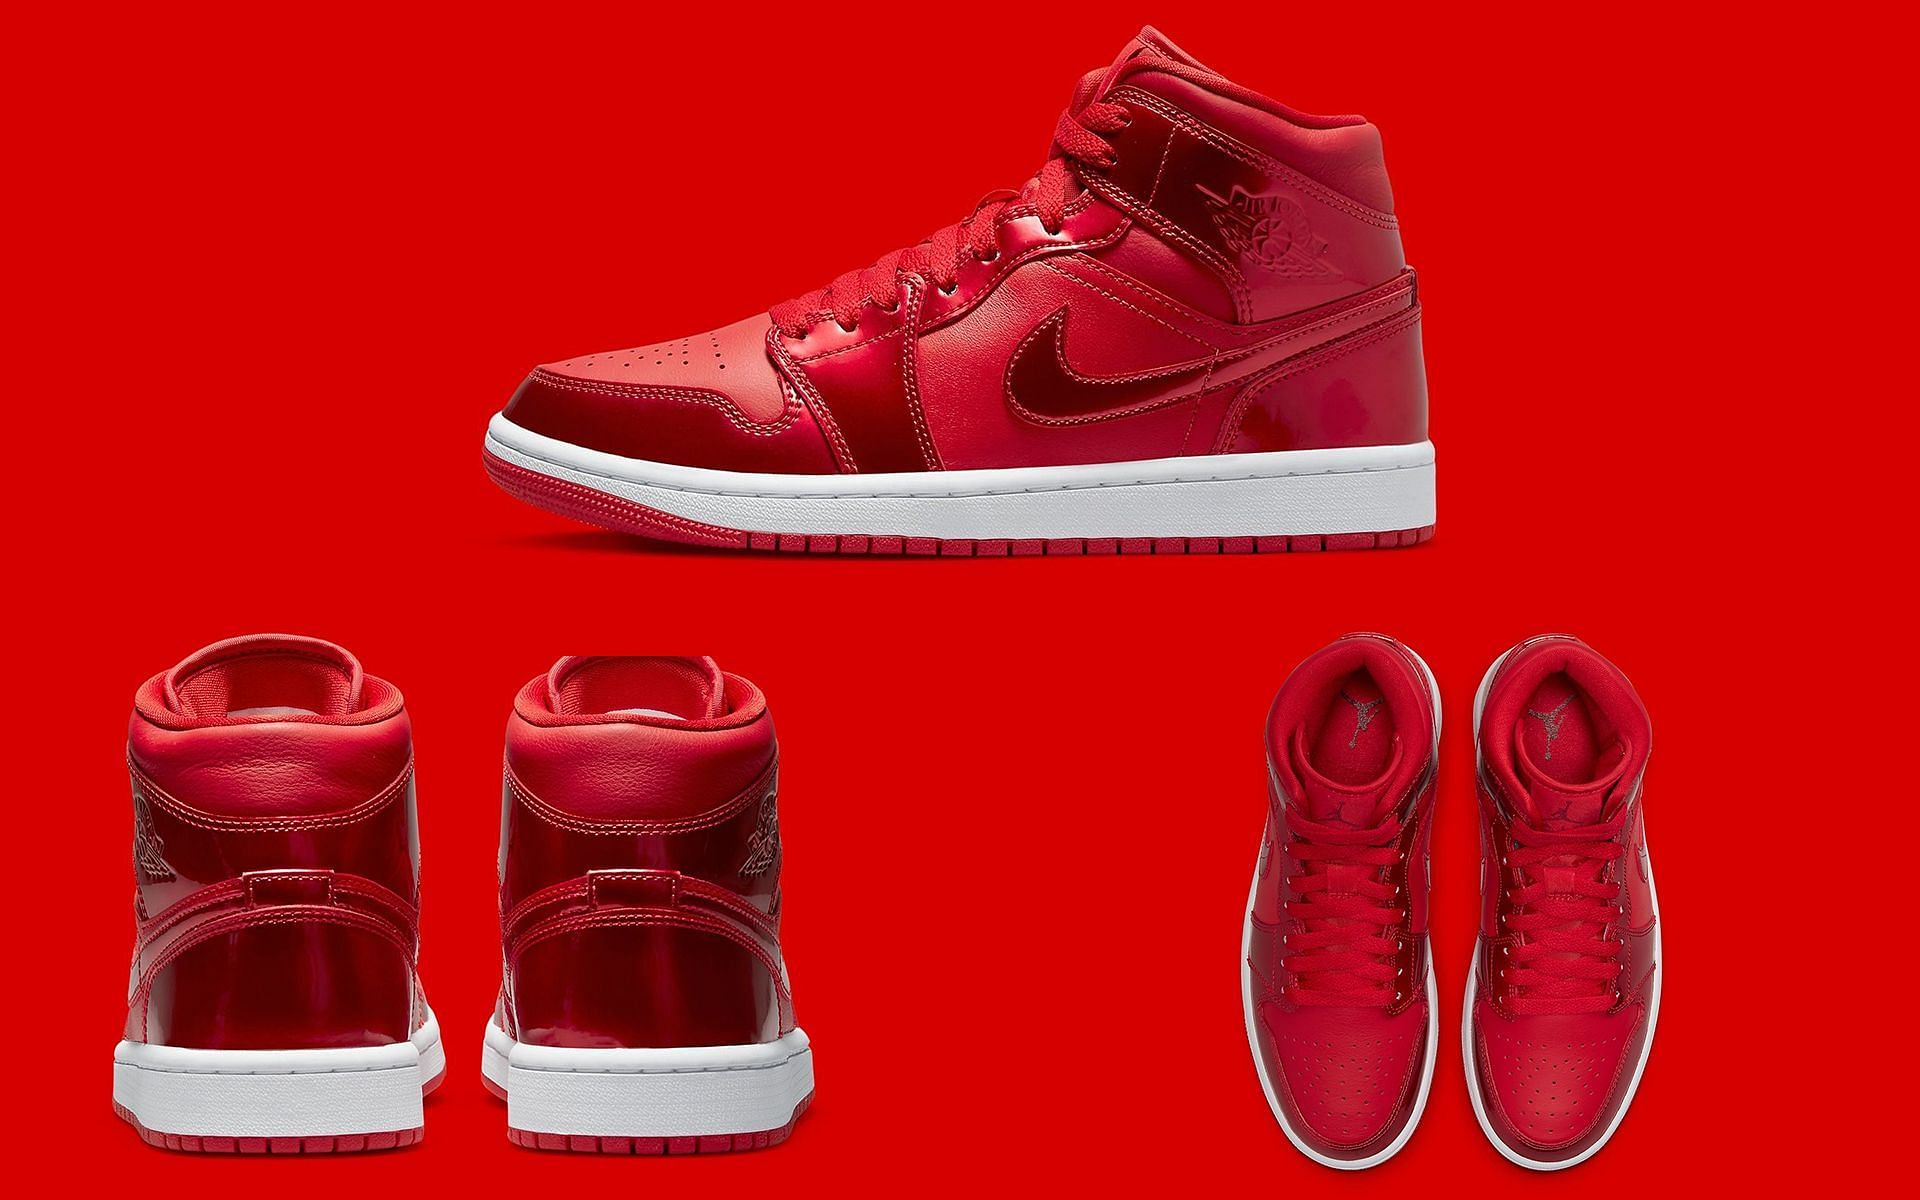 Take a closer look at the AJ 1 Mid Red Pomegranate shoes (Image via Sportskeeda)